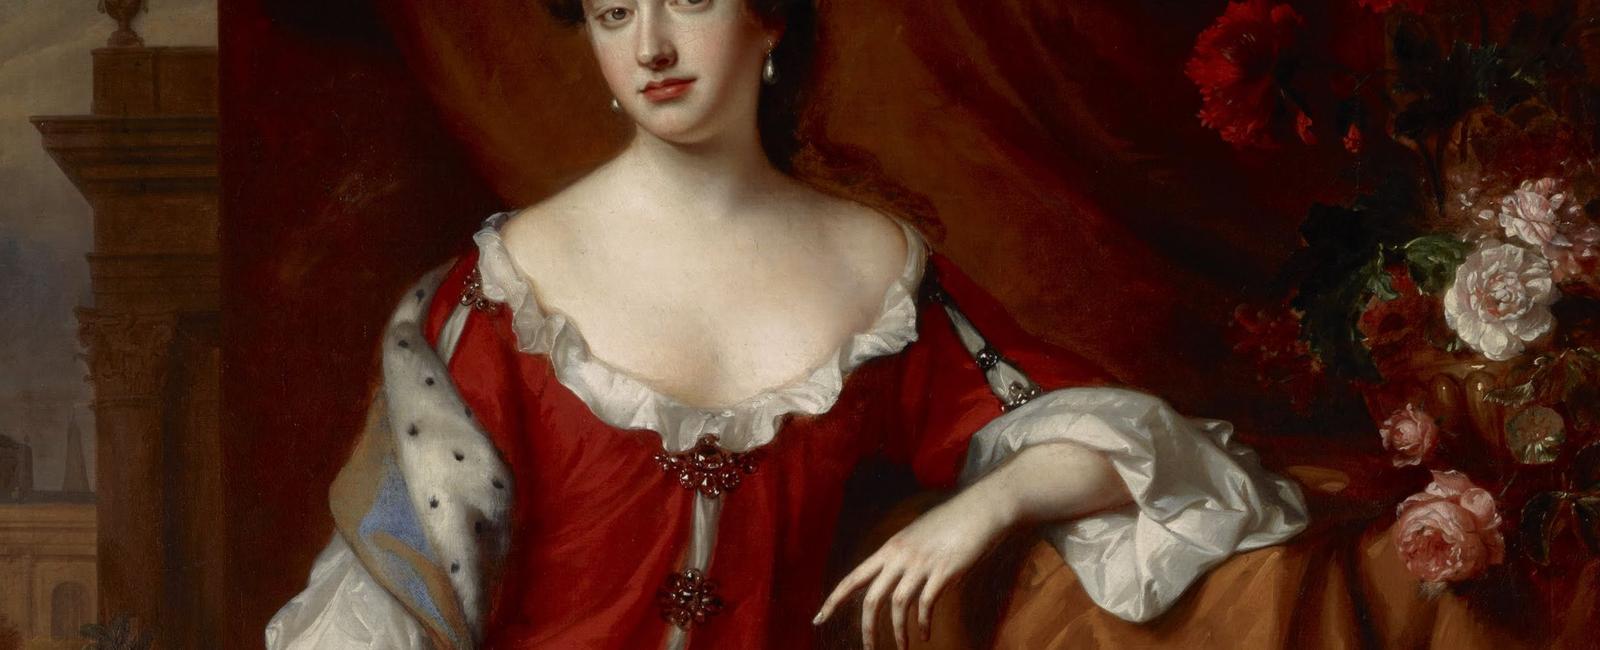 Queen anne s 18 pregnancies between the years 1684 and 1700 only saw one child survive past infancy